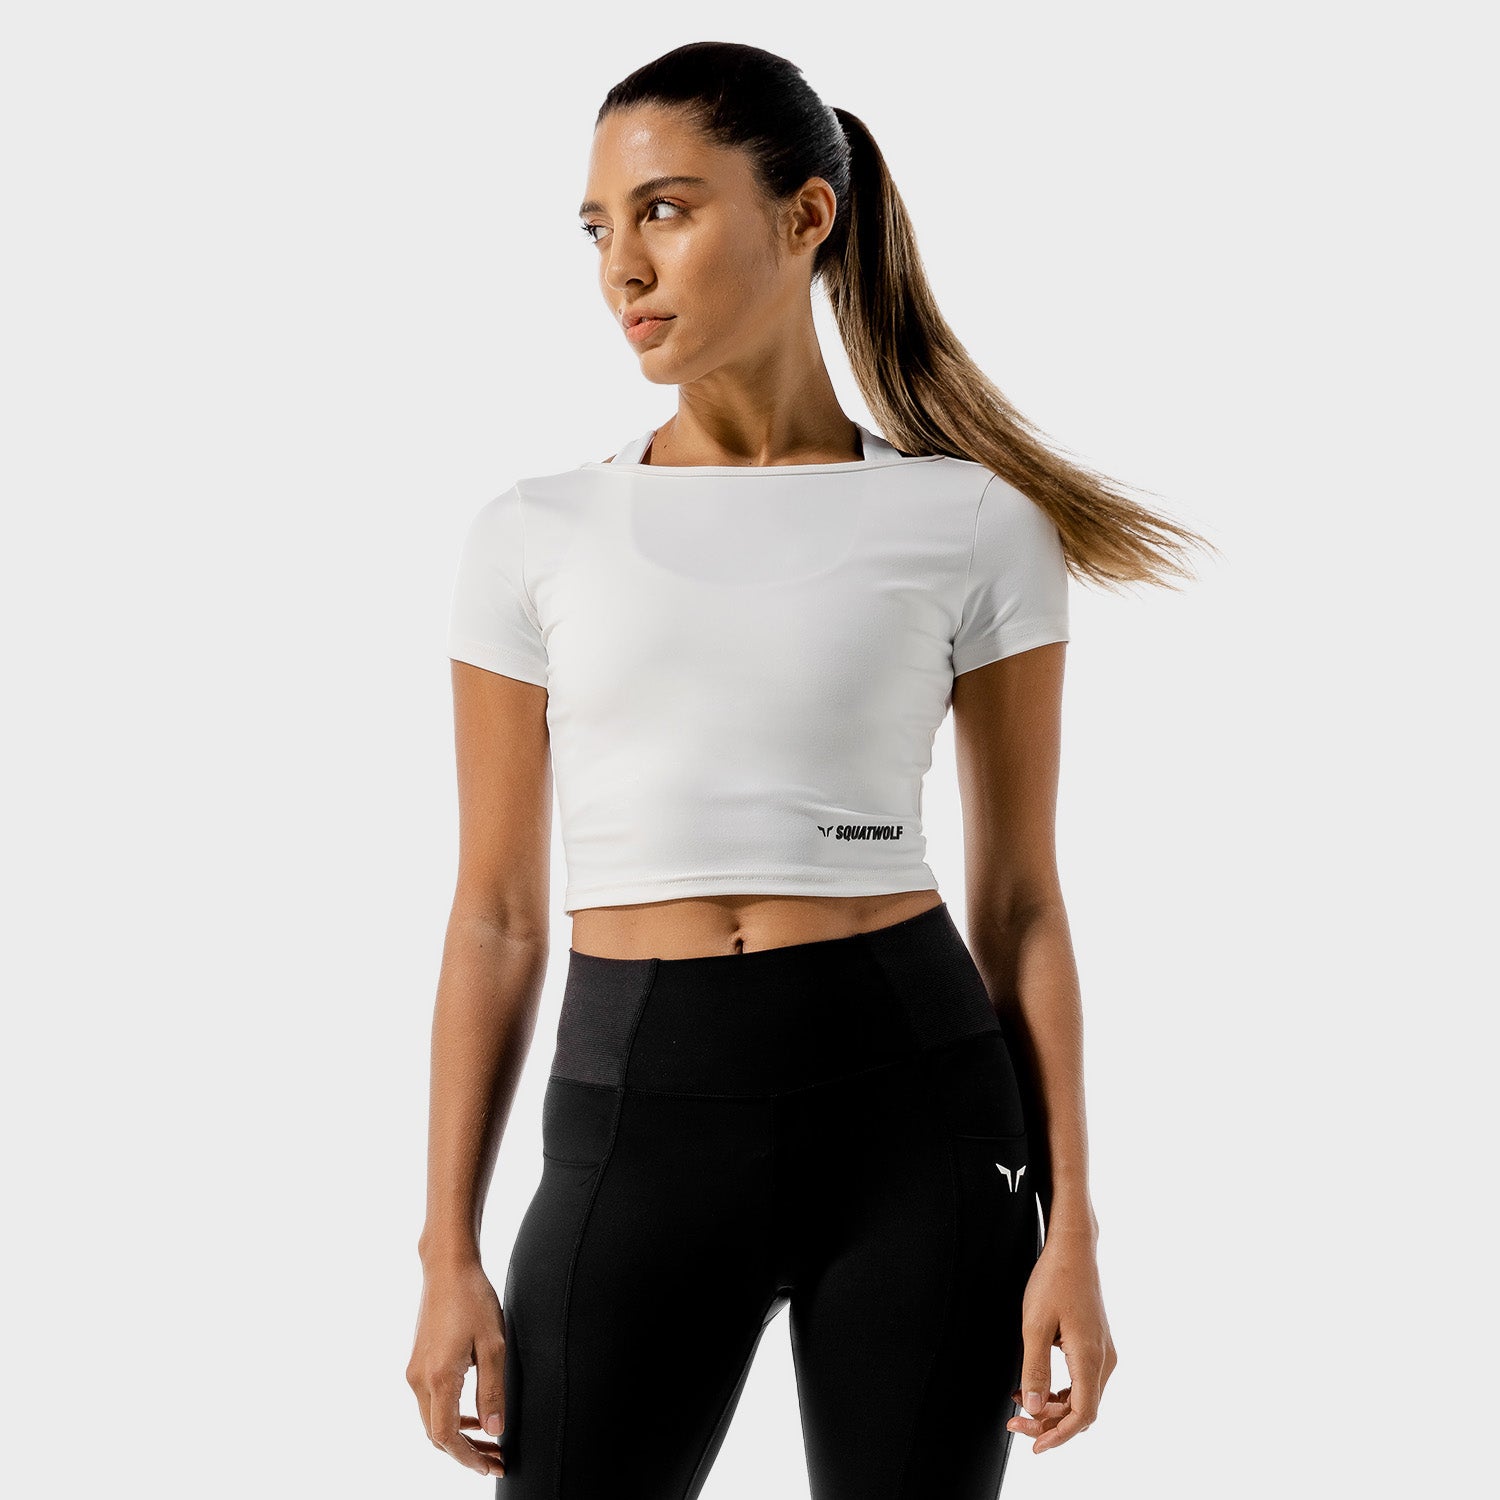 squatwolf-gym-t-shirts-for-women-warrior-crop-tee-half-sleeves-white-workout-clothes